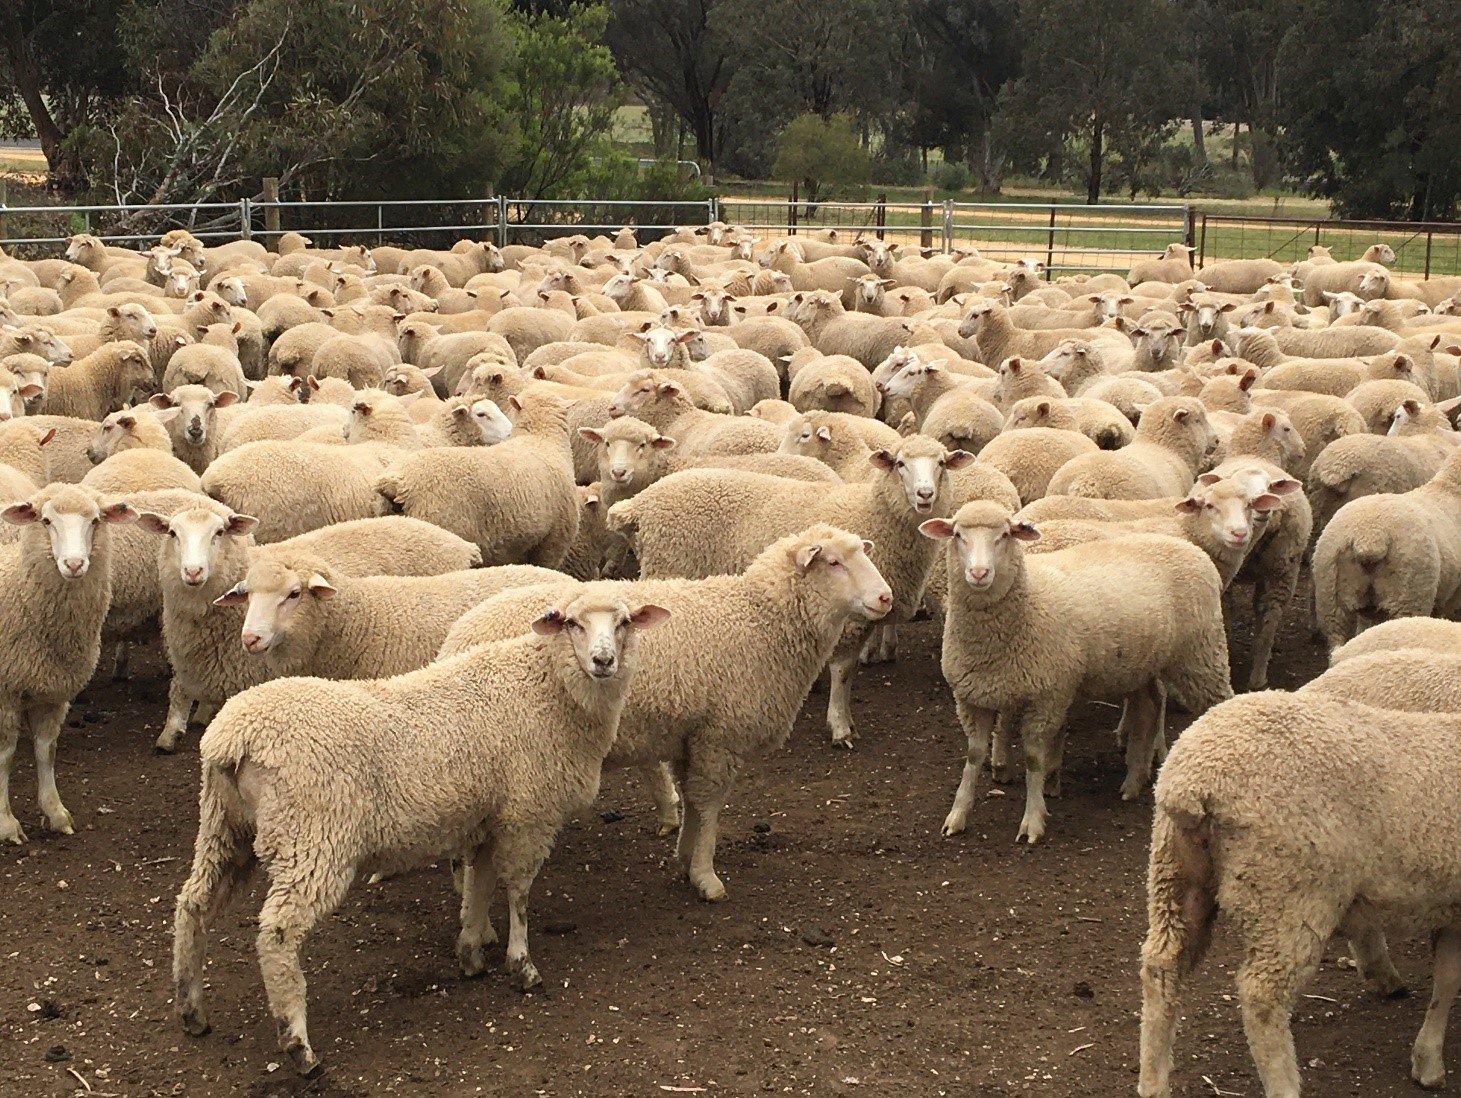 Weaned and unweaned lambs at Farm 4 prior to sale